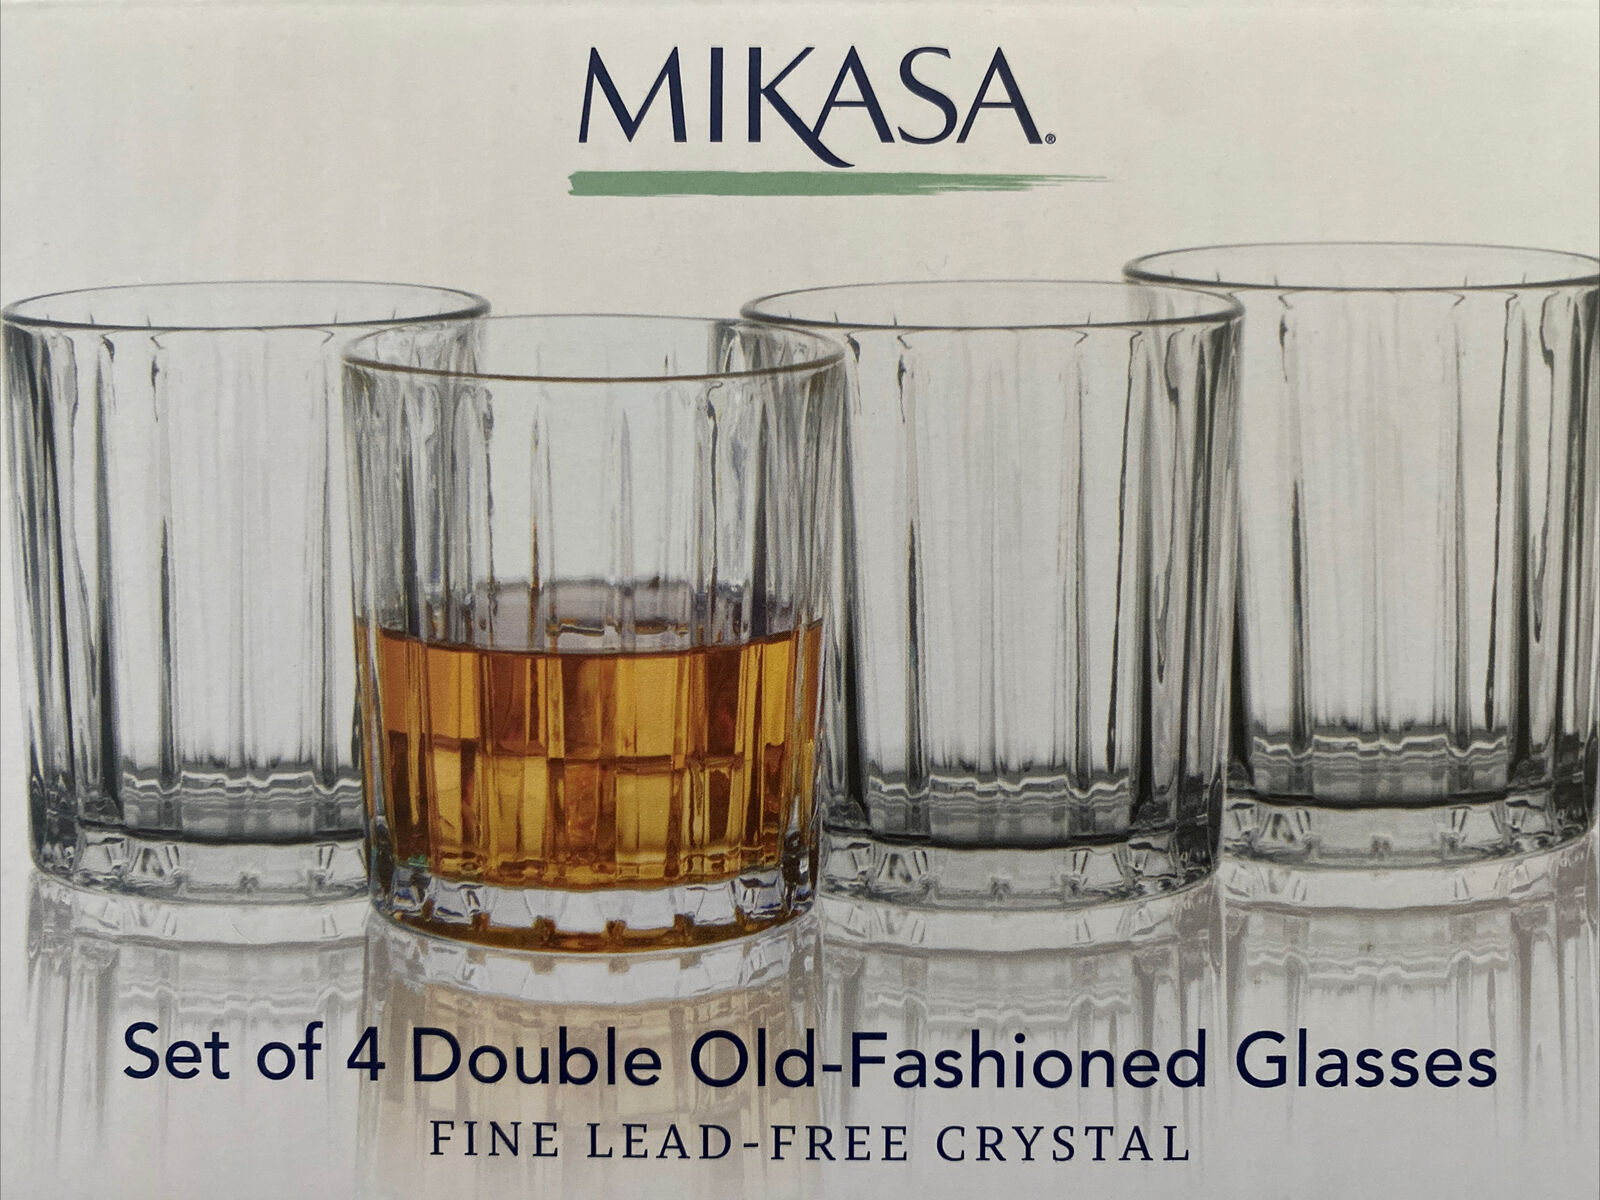 NEW MIKASA BEVERLY Fine lead free Crystal Double Old Fashioned Glasses Set Of 4